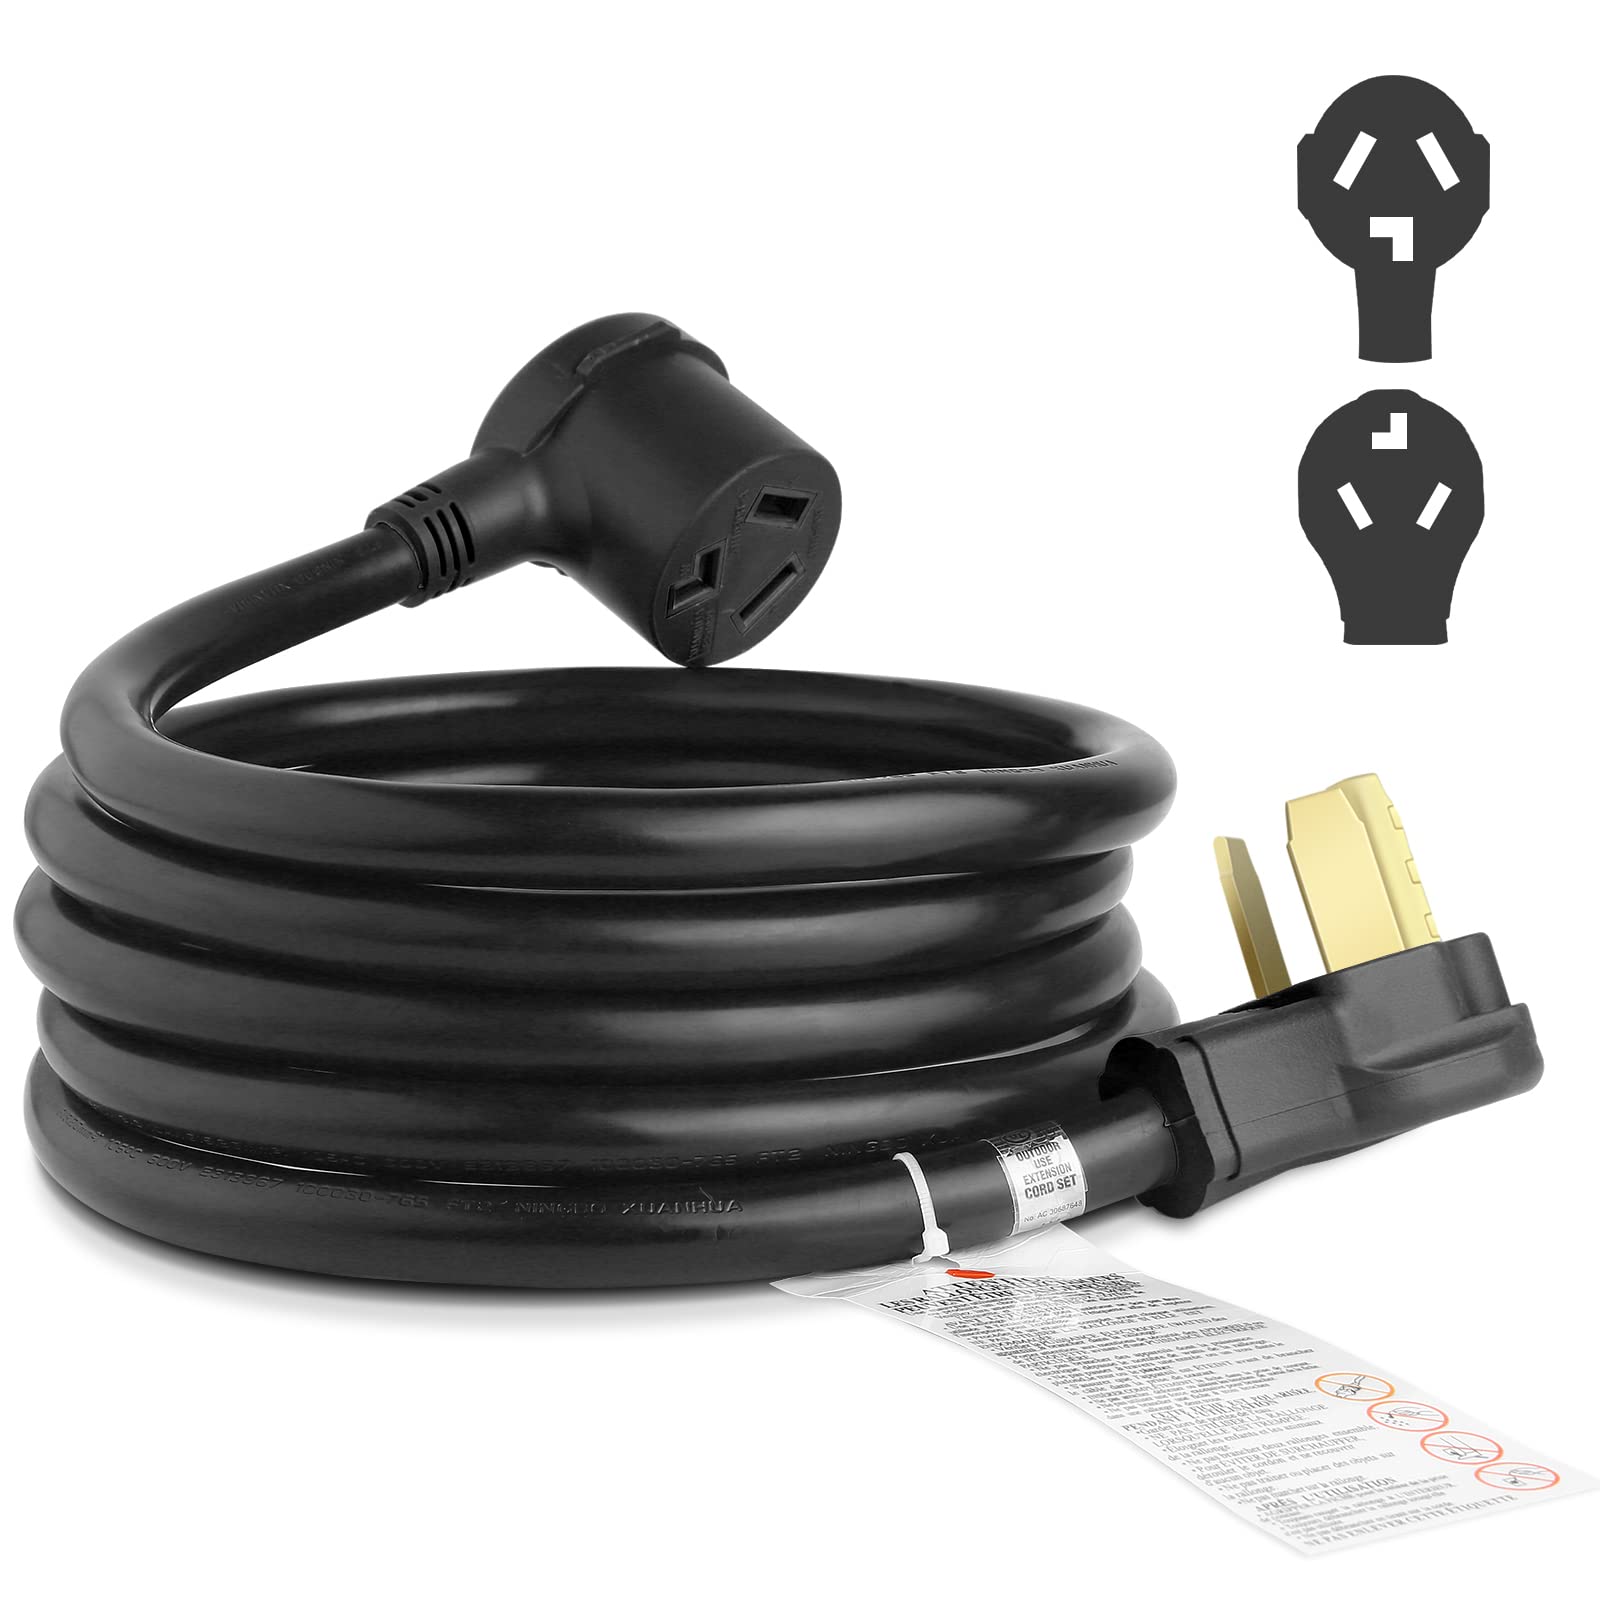 Iron Forge Cable 3 Prong Dryer Extension Cord 10 Ft, 220V Extension Cord  NEMA 10-30 Plug SRDT, 10/3 Dryer Cable 3 Prong Flat Hea